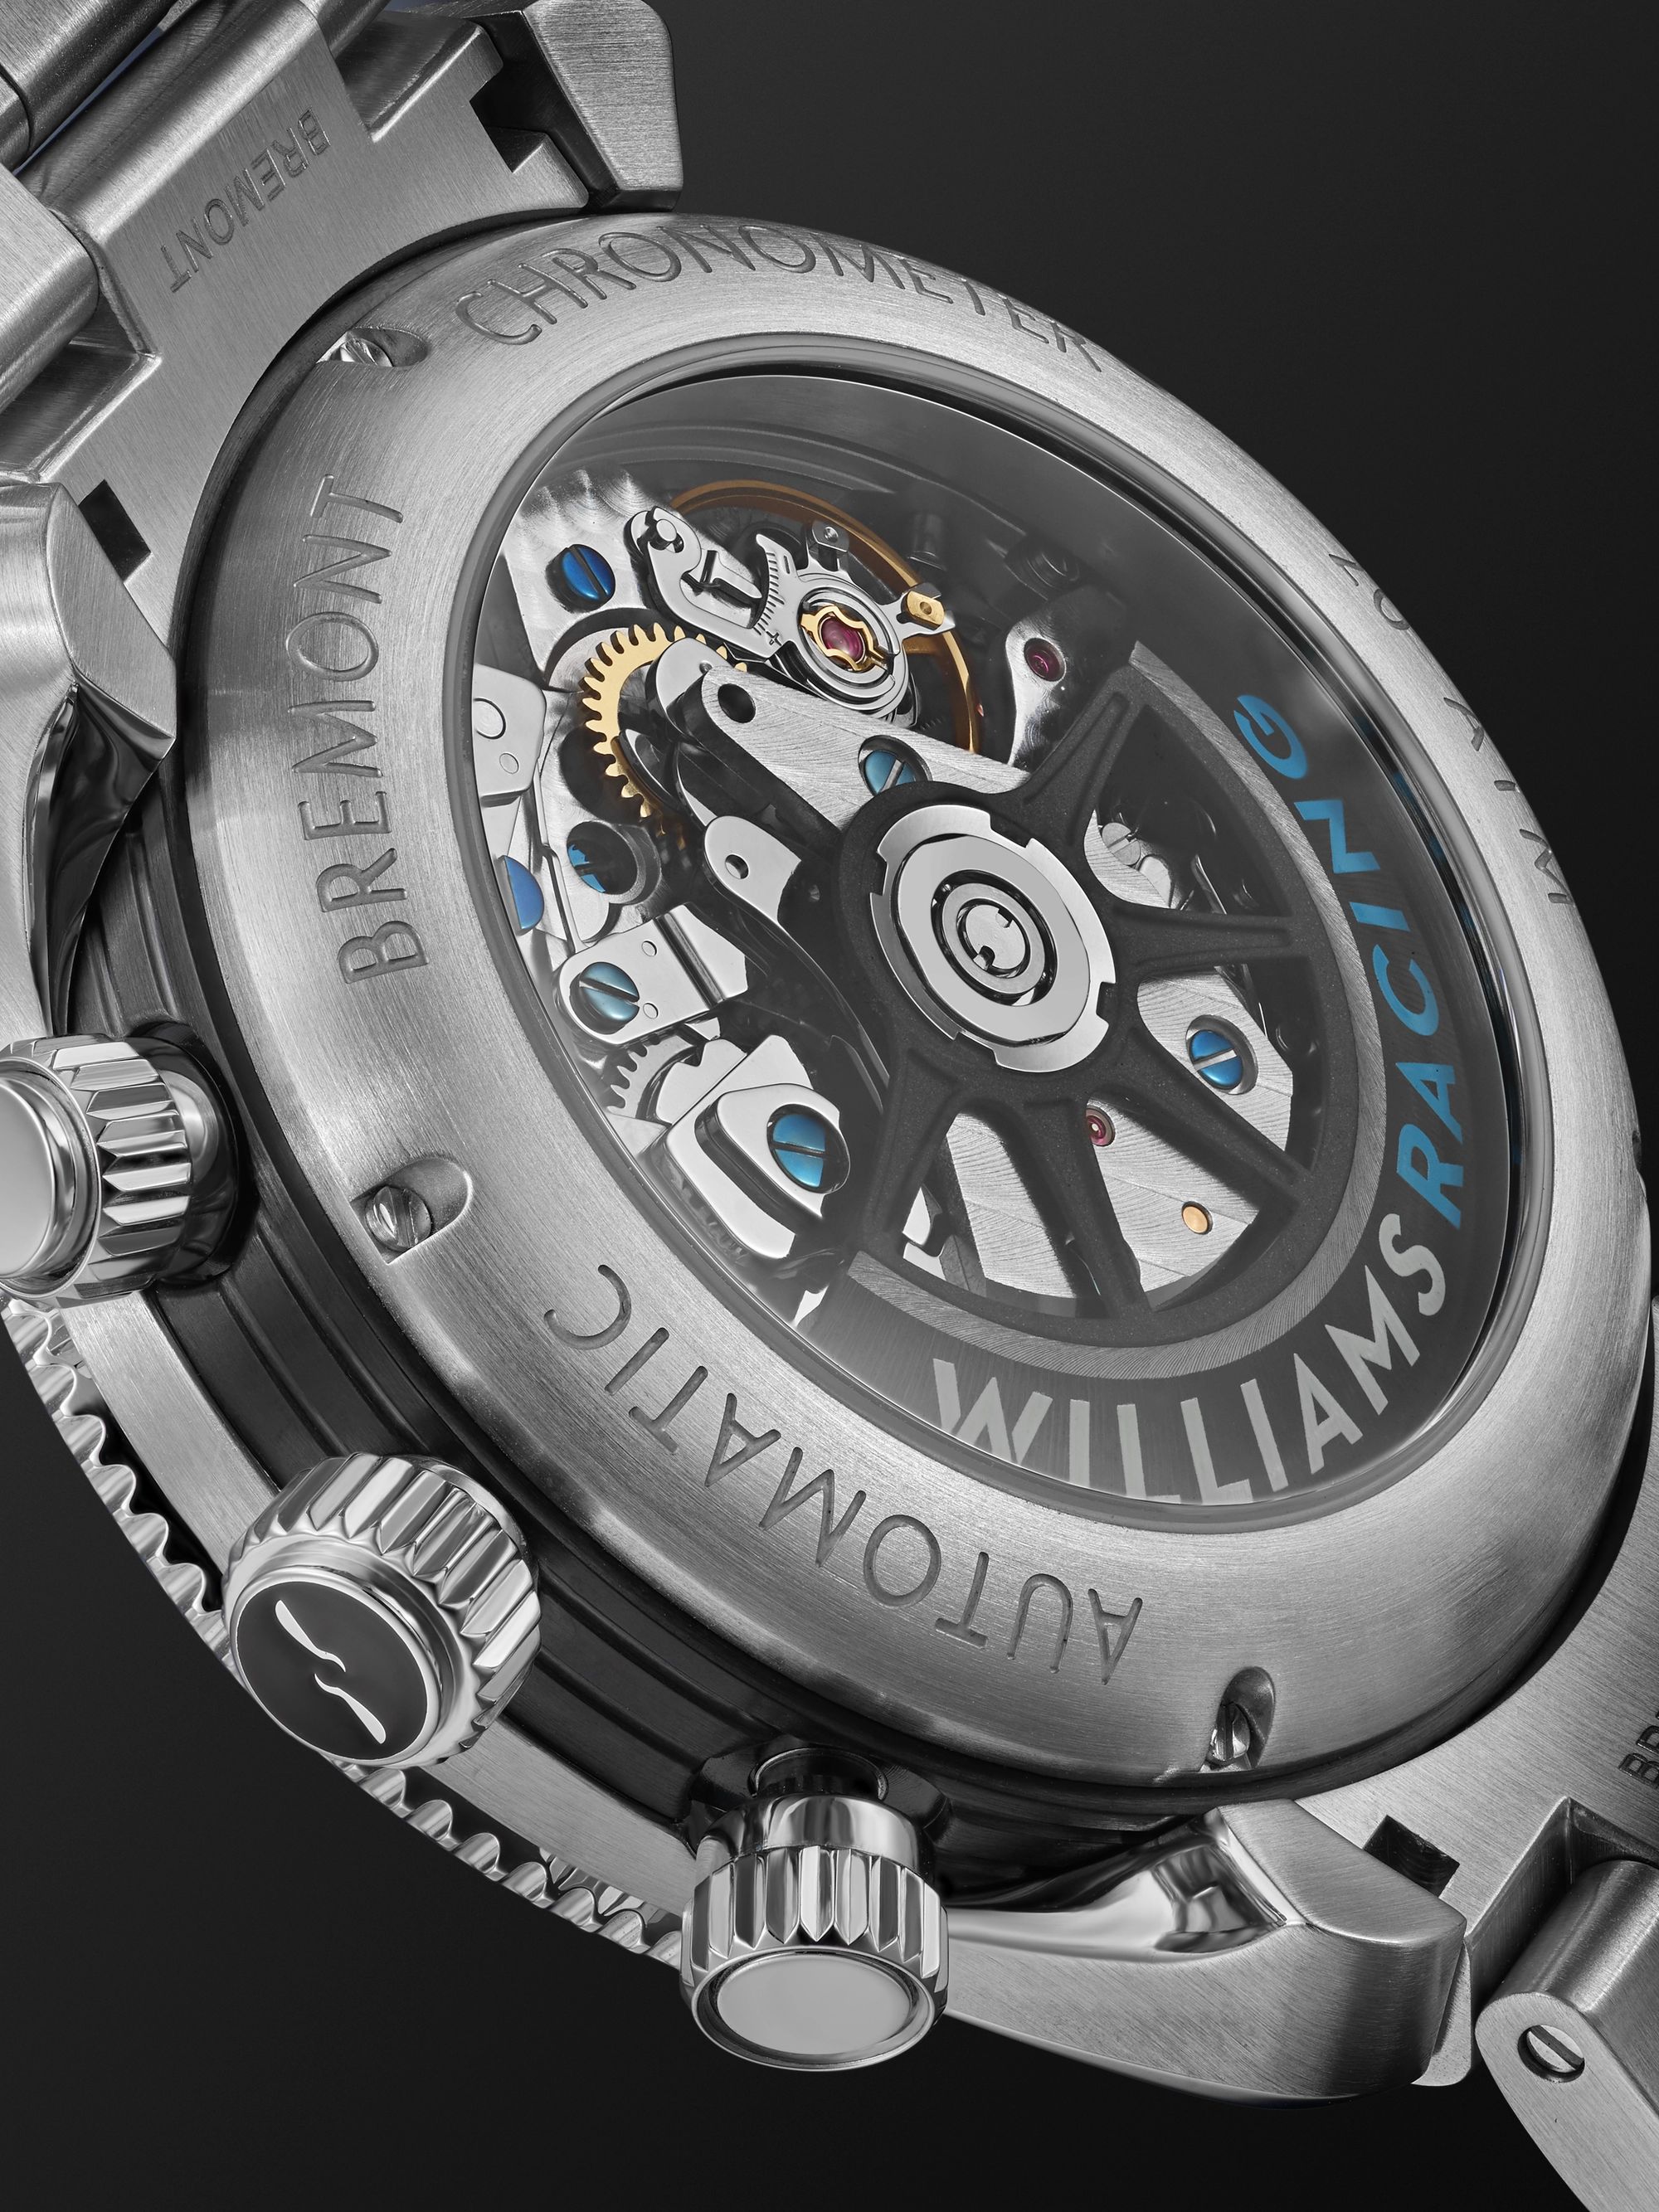 BREMONT + Williams Racing Automatic Chronograph 43mm Stainless Steel Watch, Ref. No. WR-22